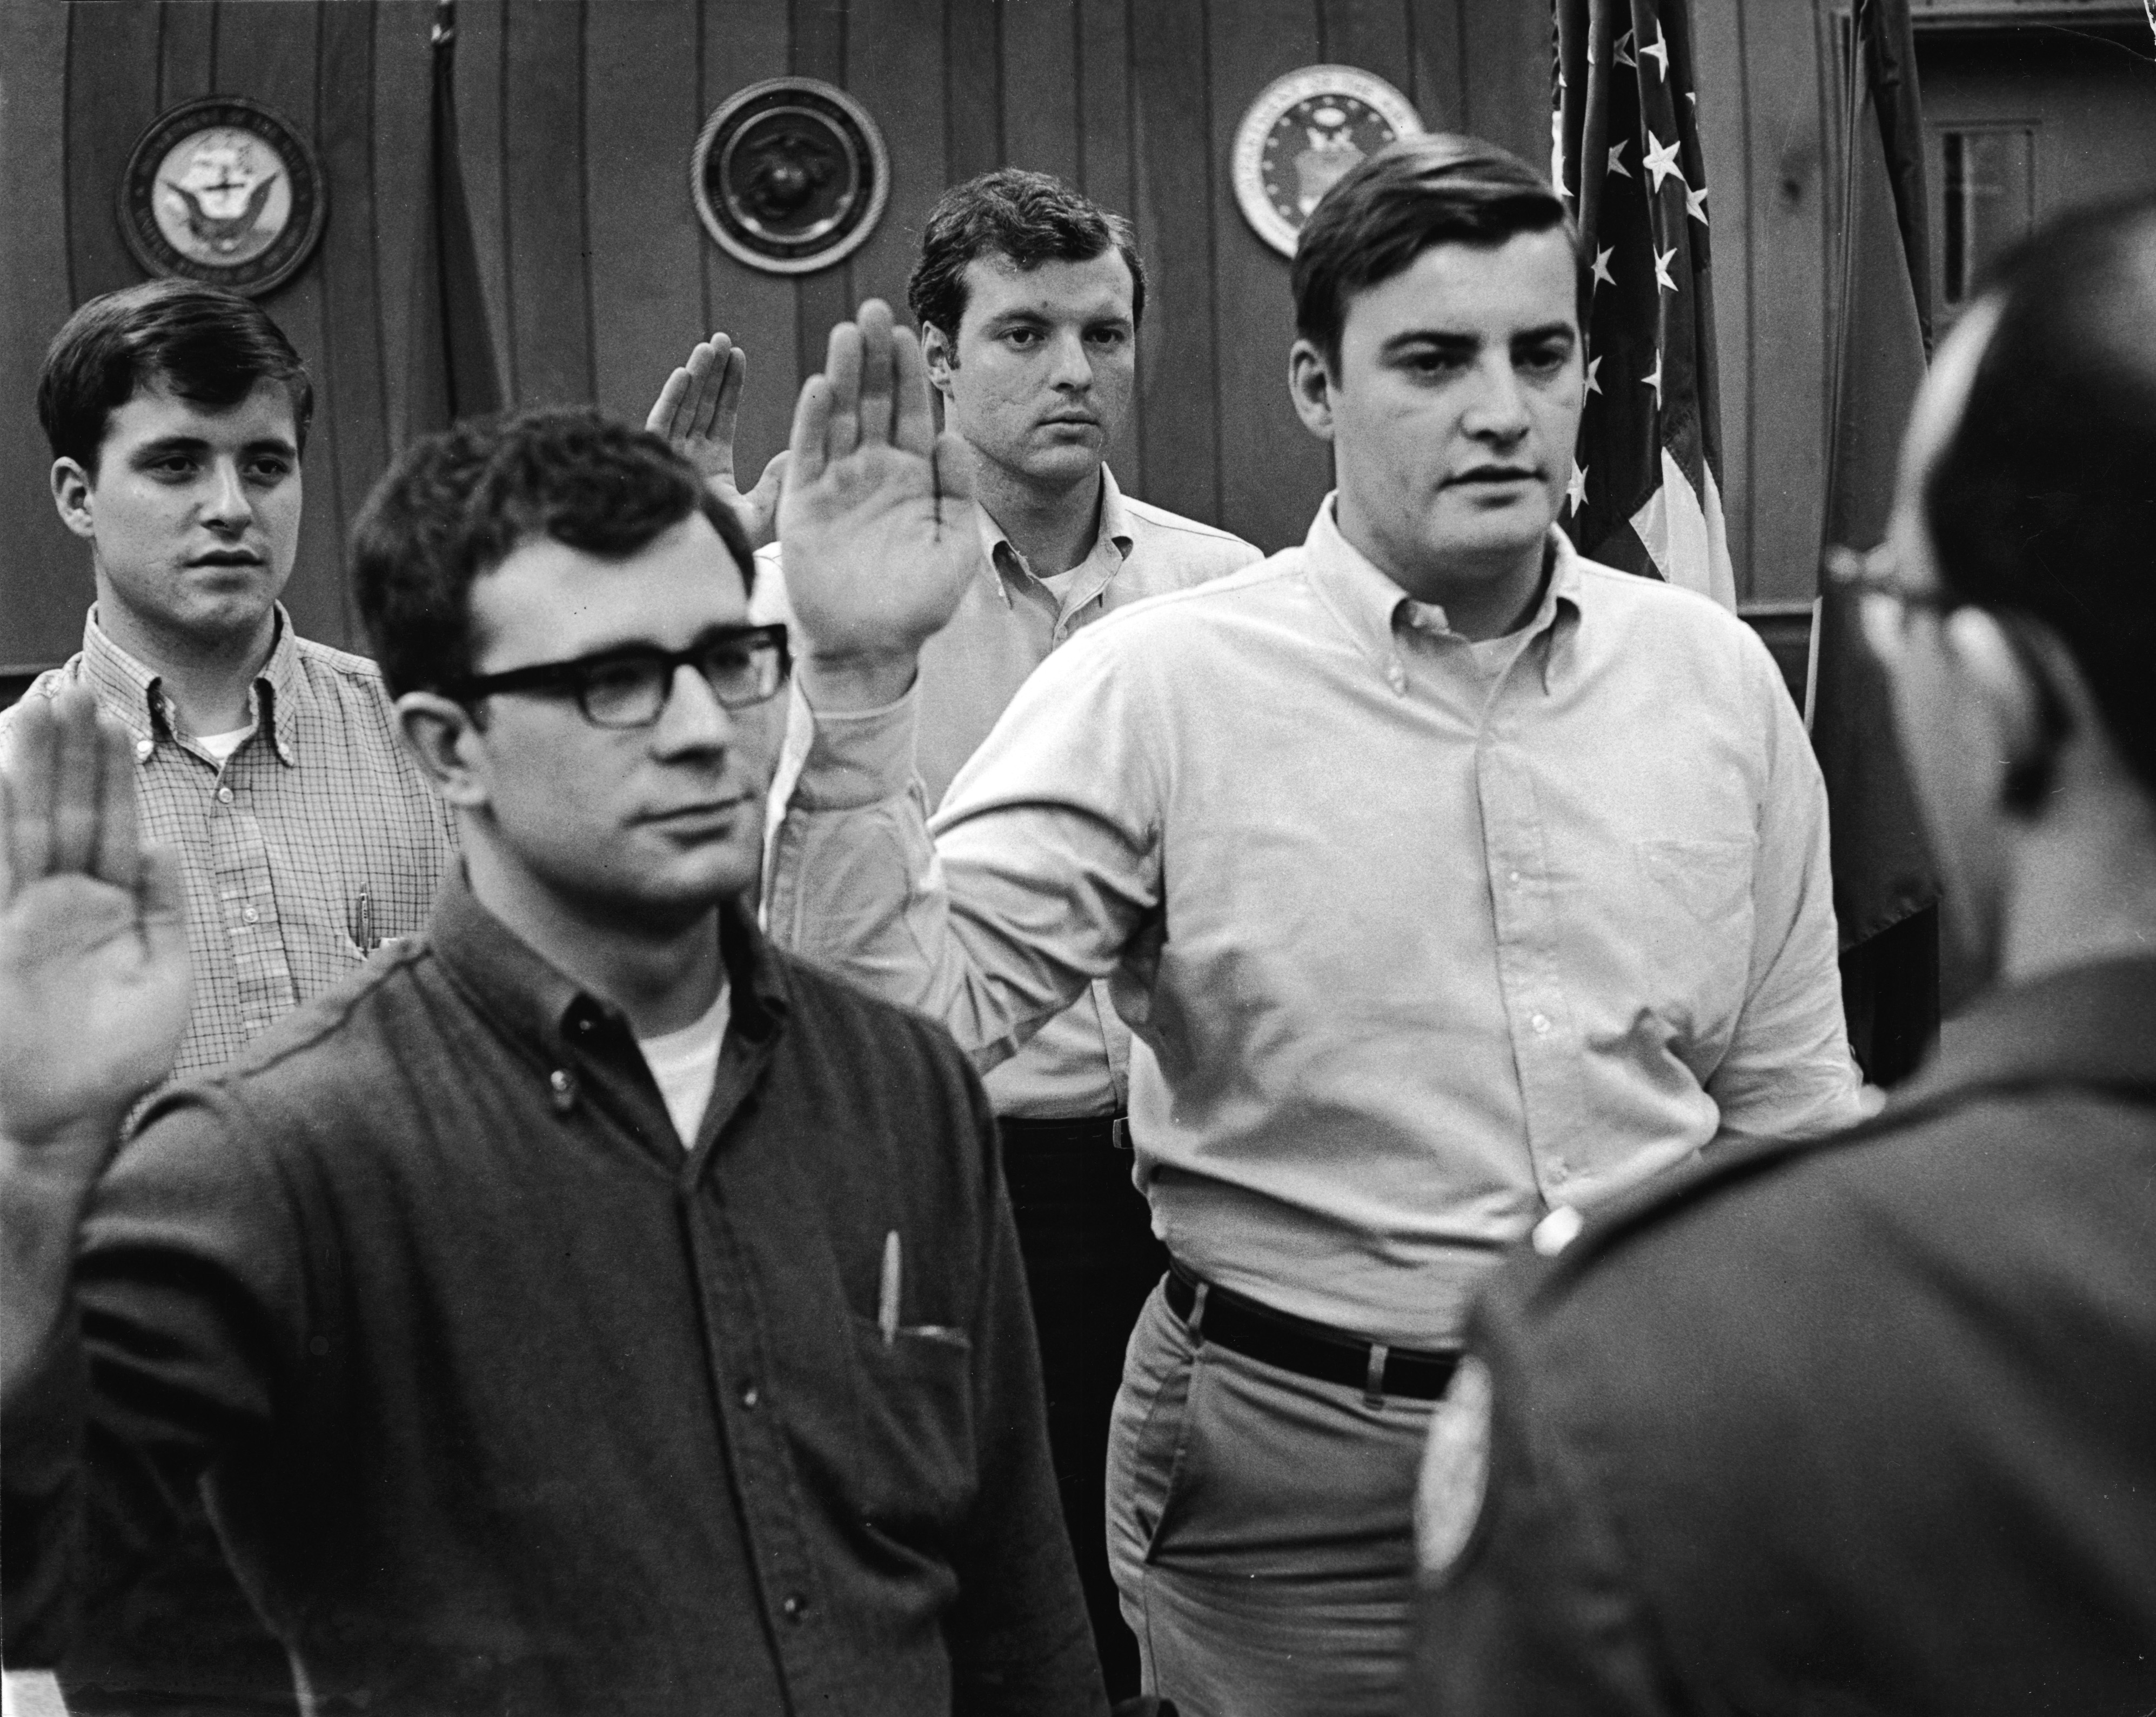 Four male civilians, with their hands raised to take an oath, stand before a military personnel man and prepare to be sworn in and become recruits in the armed forces during the Vietnam War Era, St. Paul, Minnesota, mid 1960s. (Photo by Rohn Engh/FPG/Getty Images)